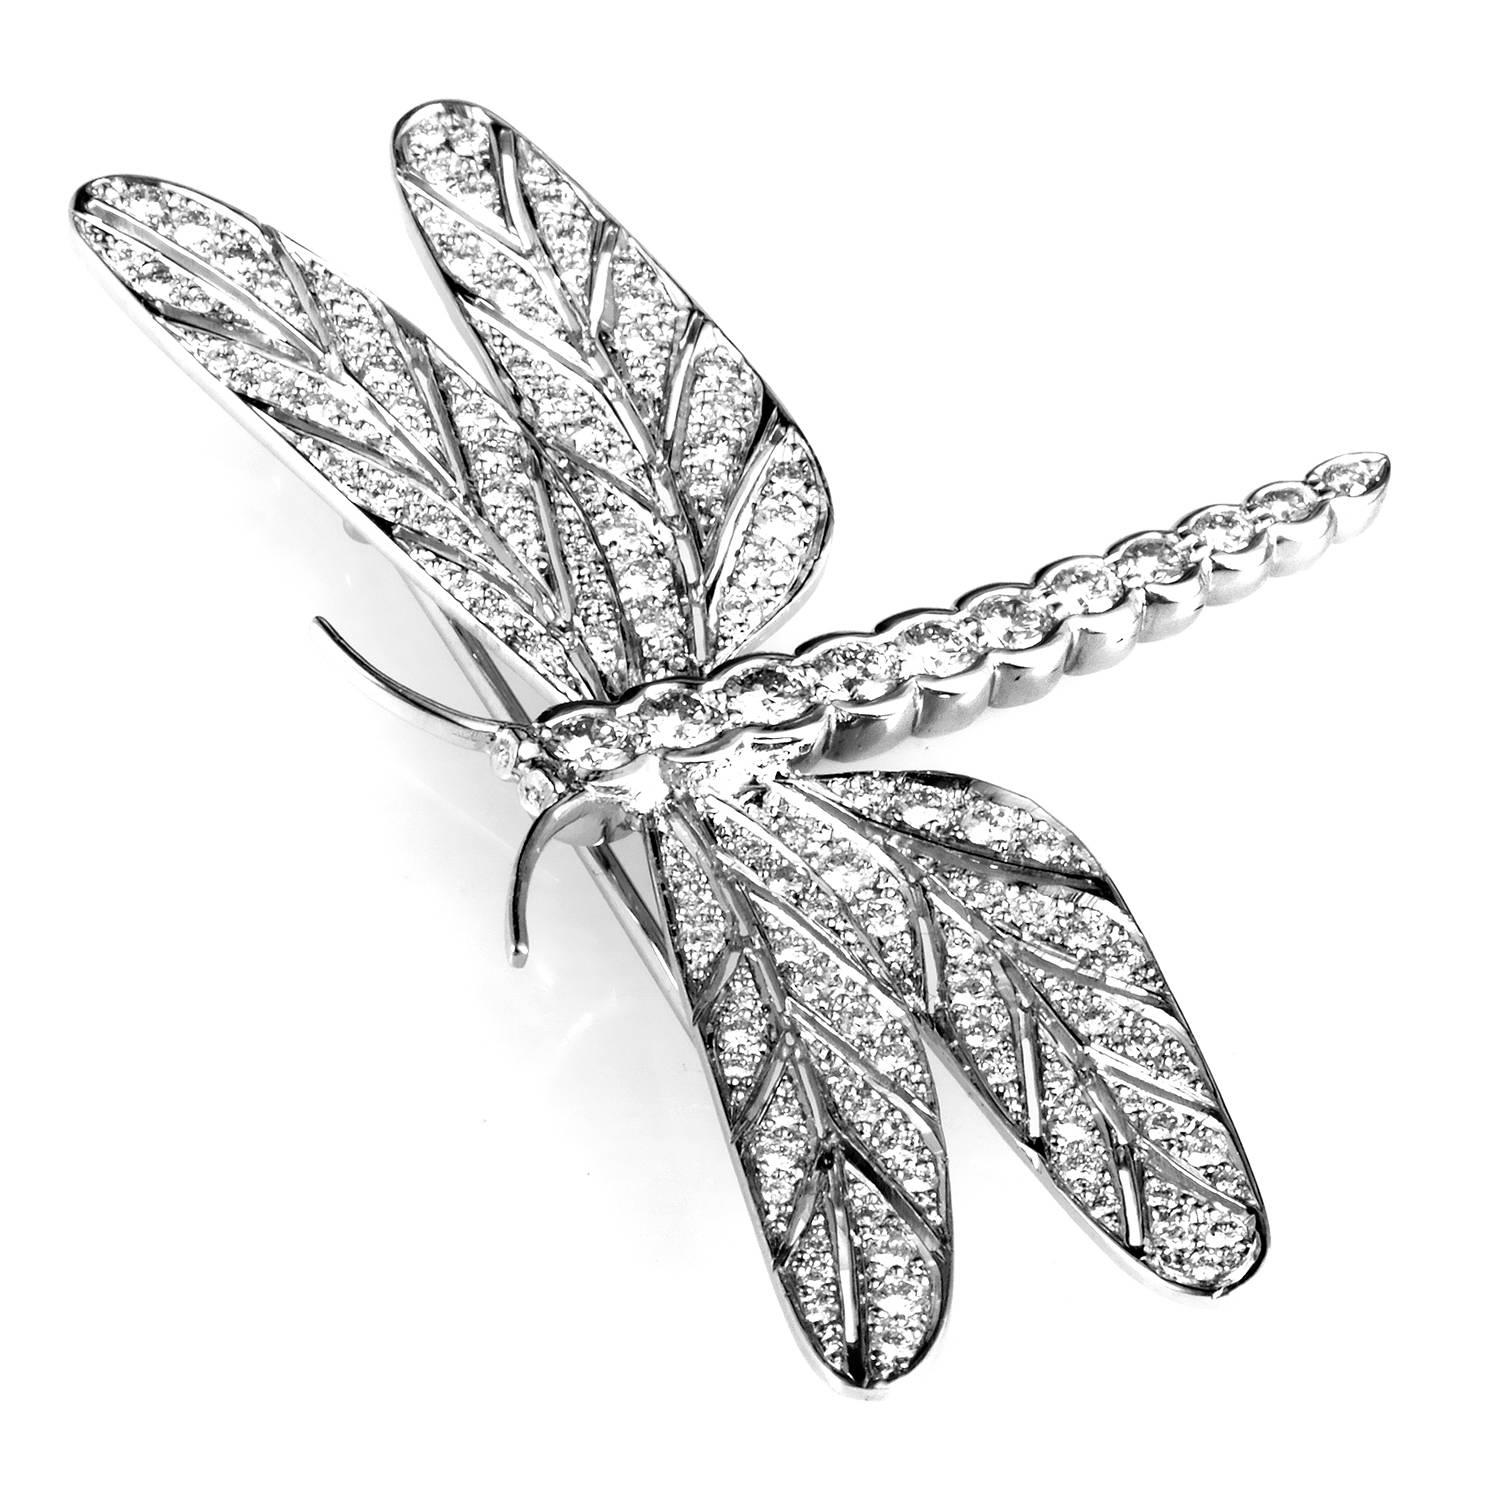 An extraordinarily accurate and artistically brilliant depiction of a butterfly, this brooch from E. Wolfe & Co. is a magnificent interpretation of one of the nature’s most graceful creations, designed in elegant 18K white gold adorned with a